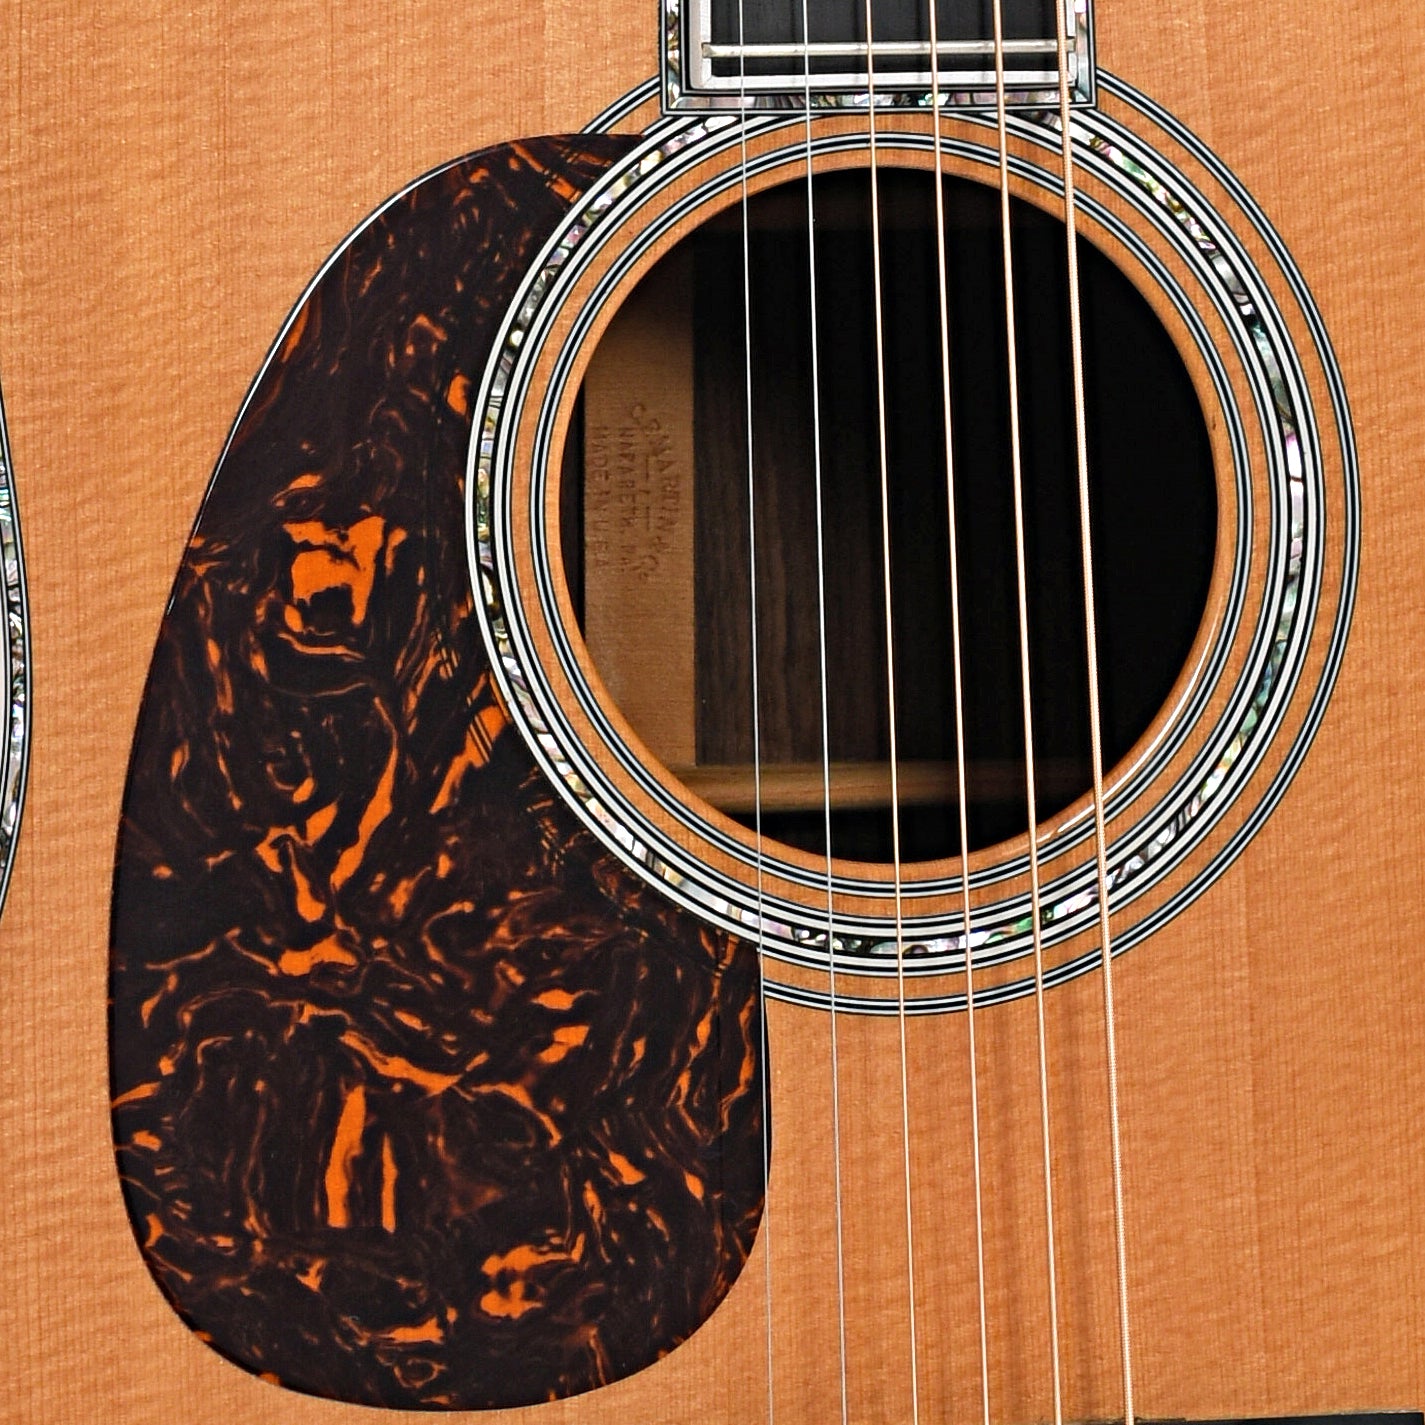 Sound hole and pickguard of Martin D-45L Acoustic Guitar